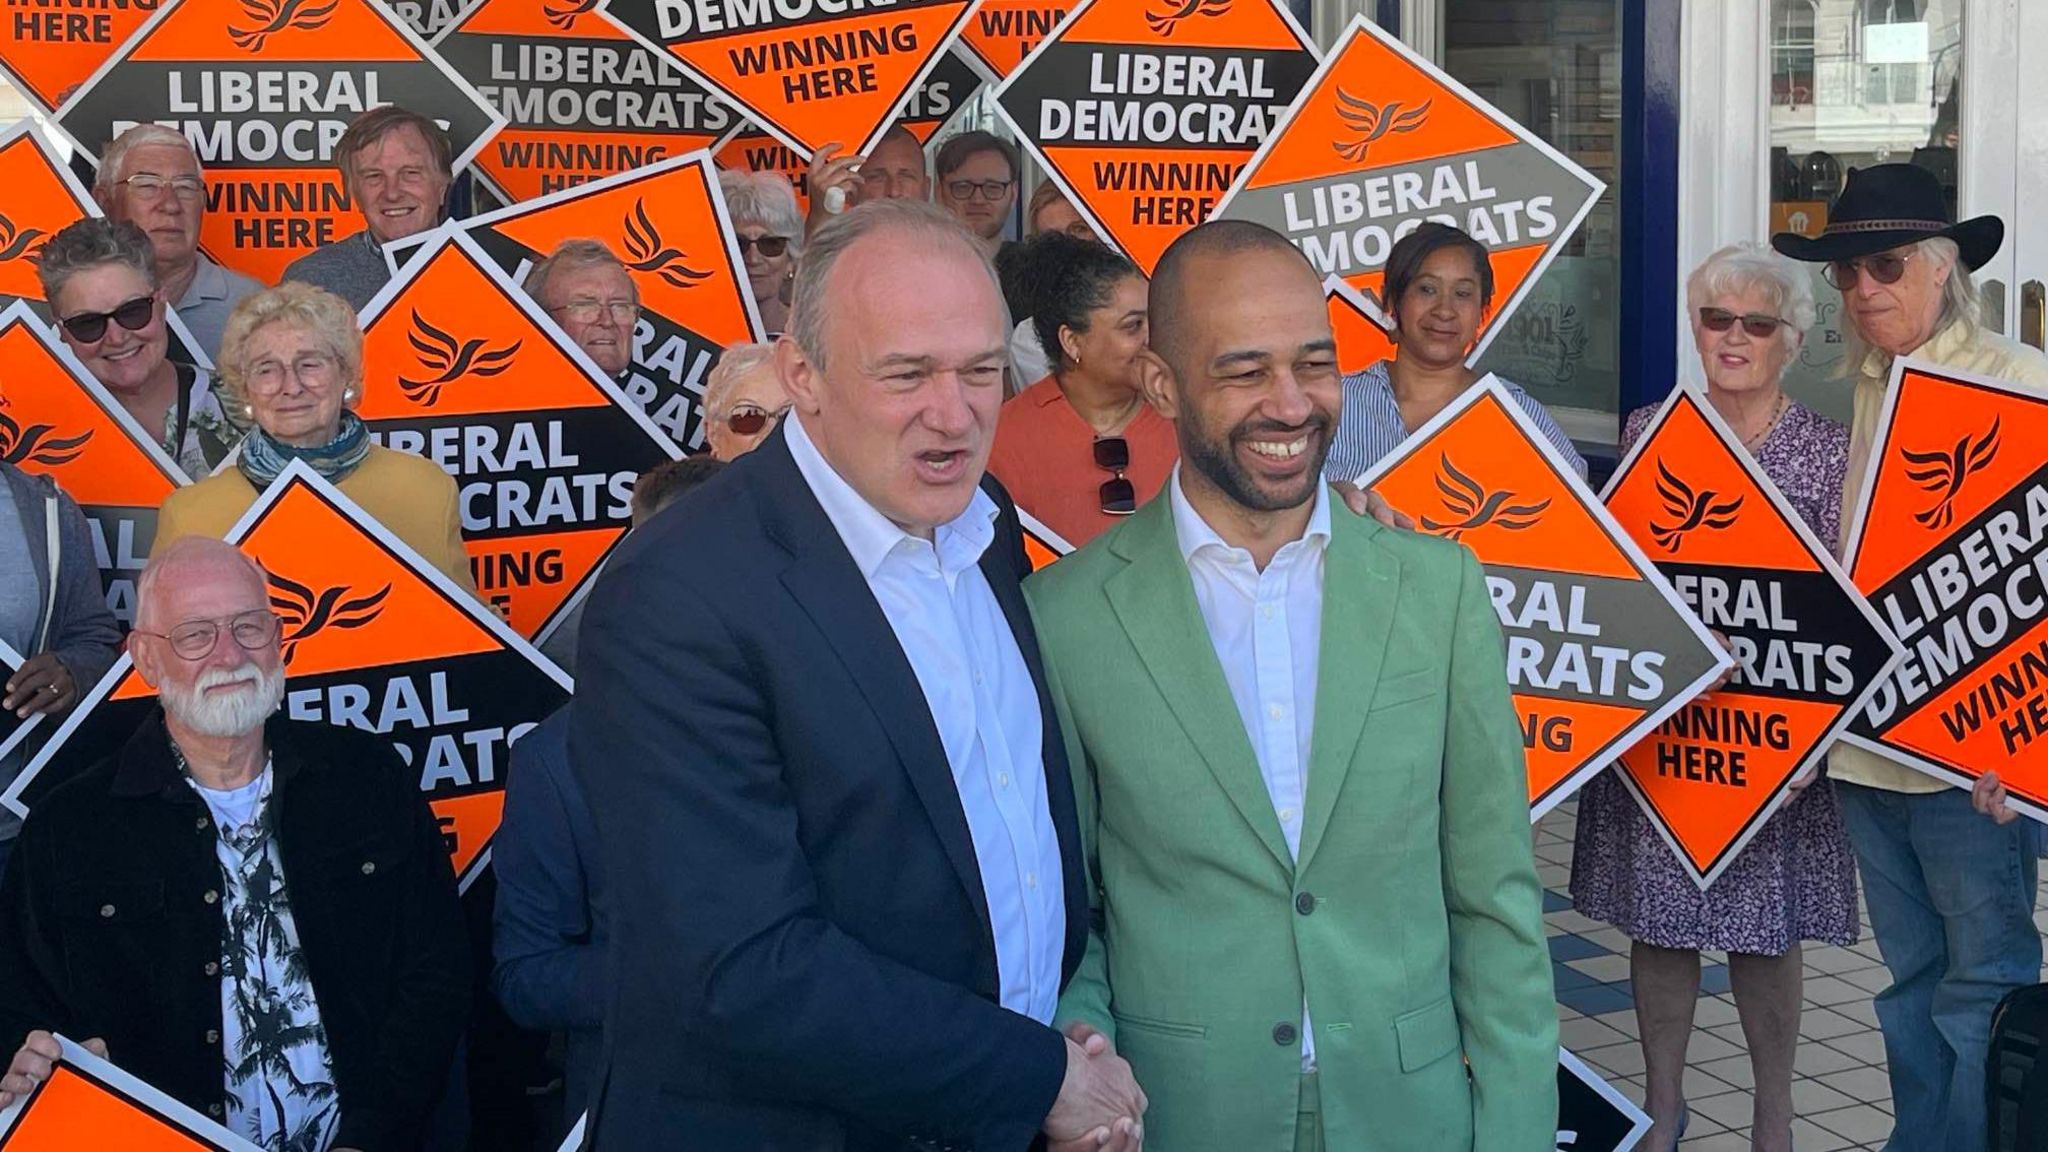 Sir Ed Davey and Josh Babarinde with a group of Liberal Democrat supporters holding up party signs